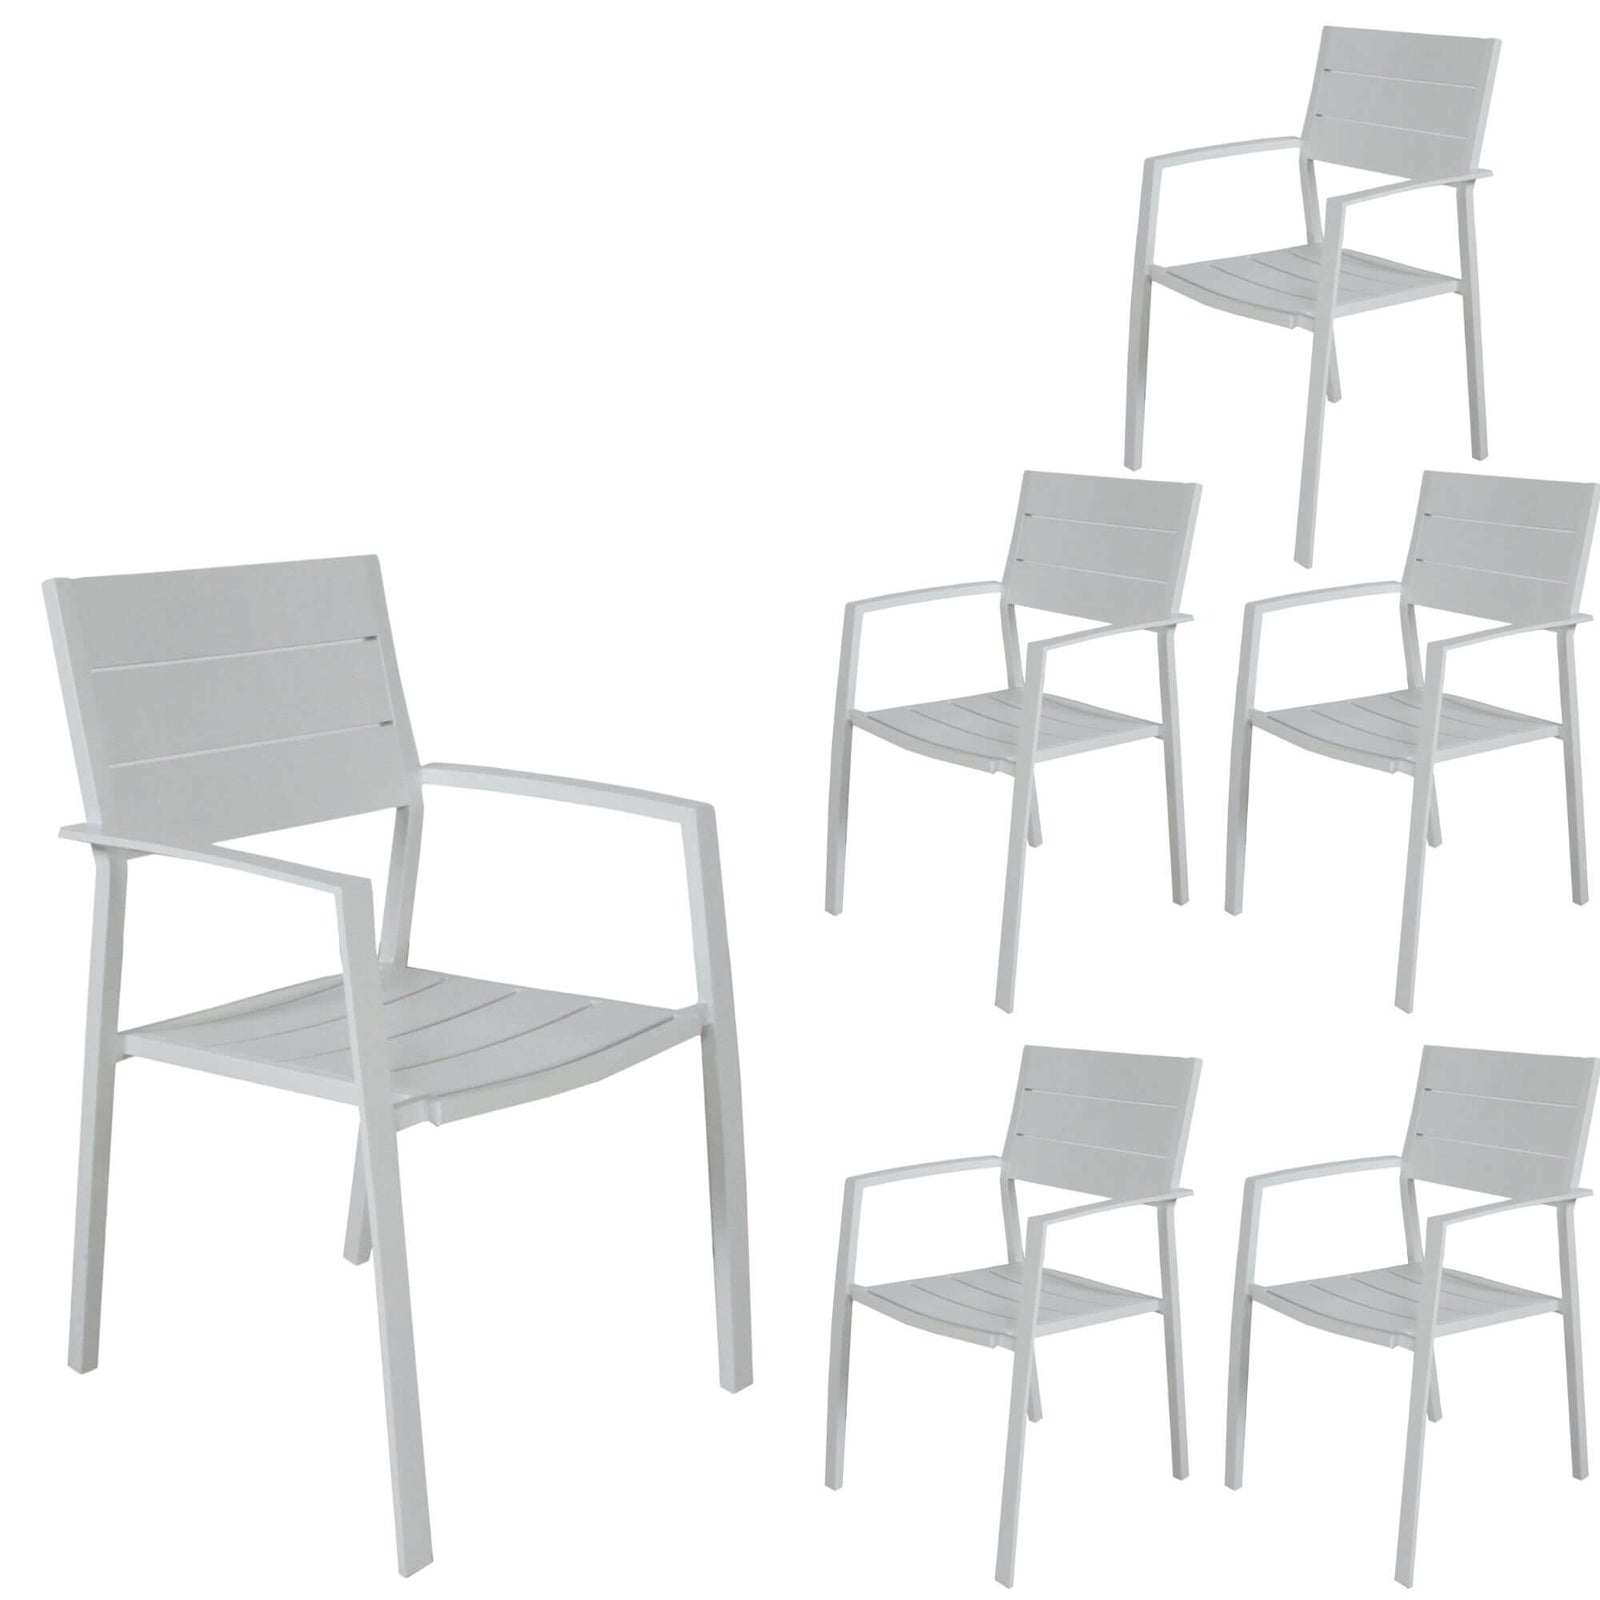 Percy 6pc Set Outdoor Dining Table Chair Aluminium Frame White-Upinteriors